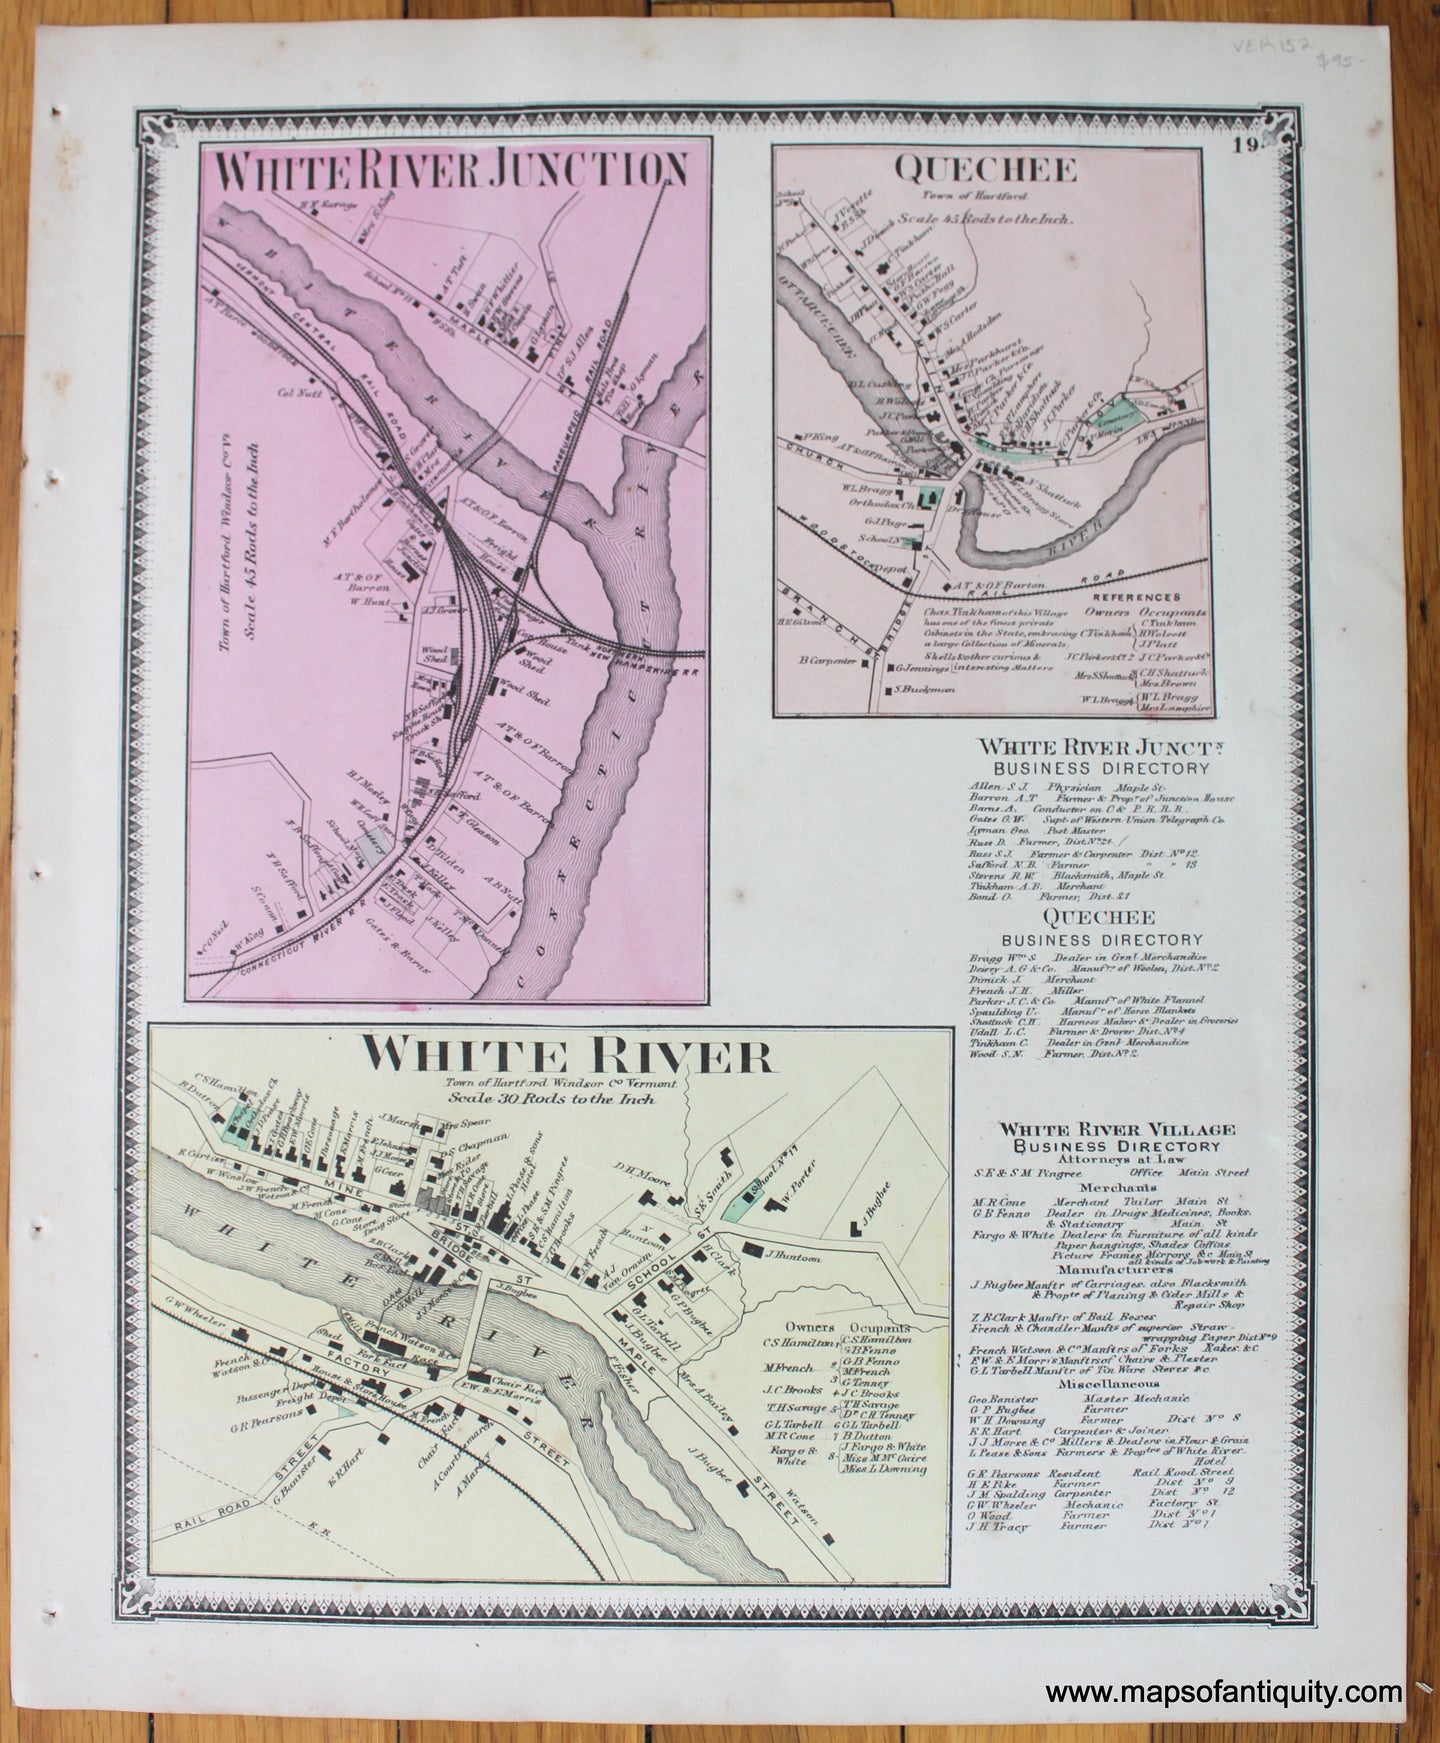 Antique-Hand-Colored-Map-White-River-White-River-Junction-Quechee-VT-1869-Beers-1800s-19th-century-Maps-of-Antiquity